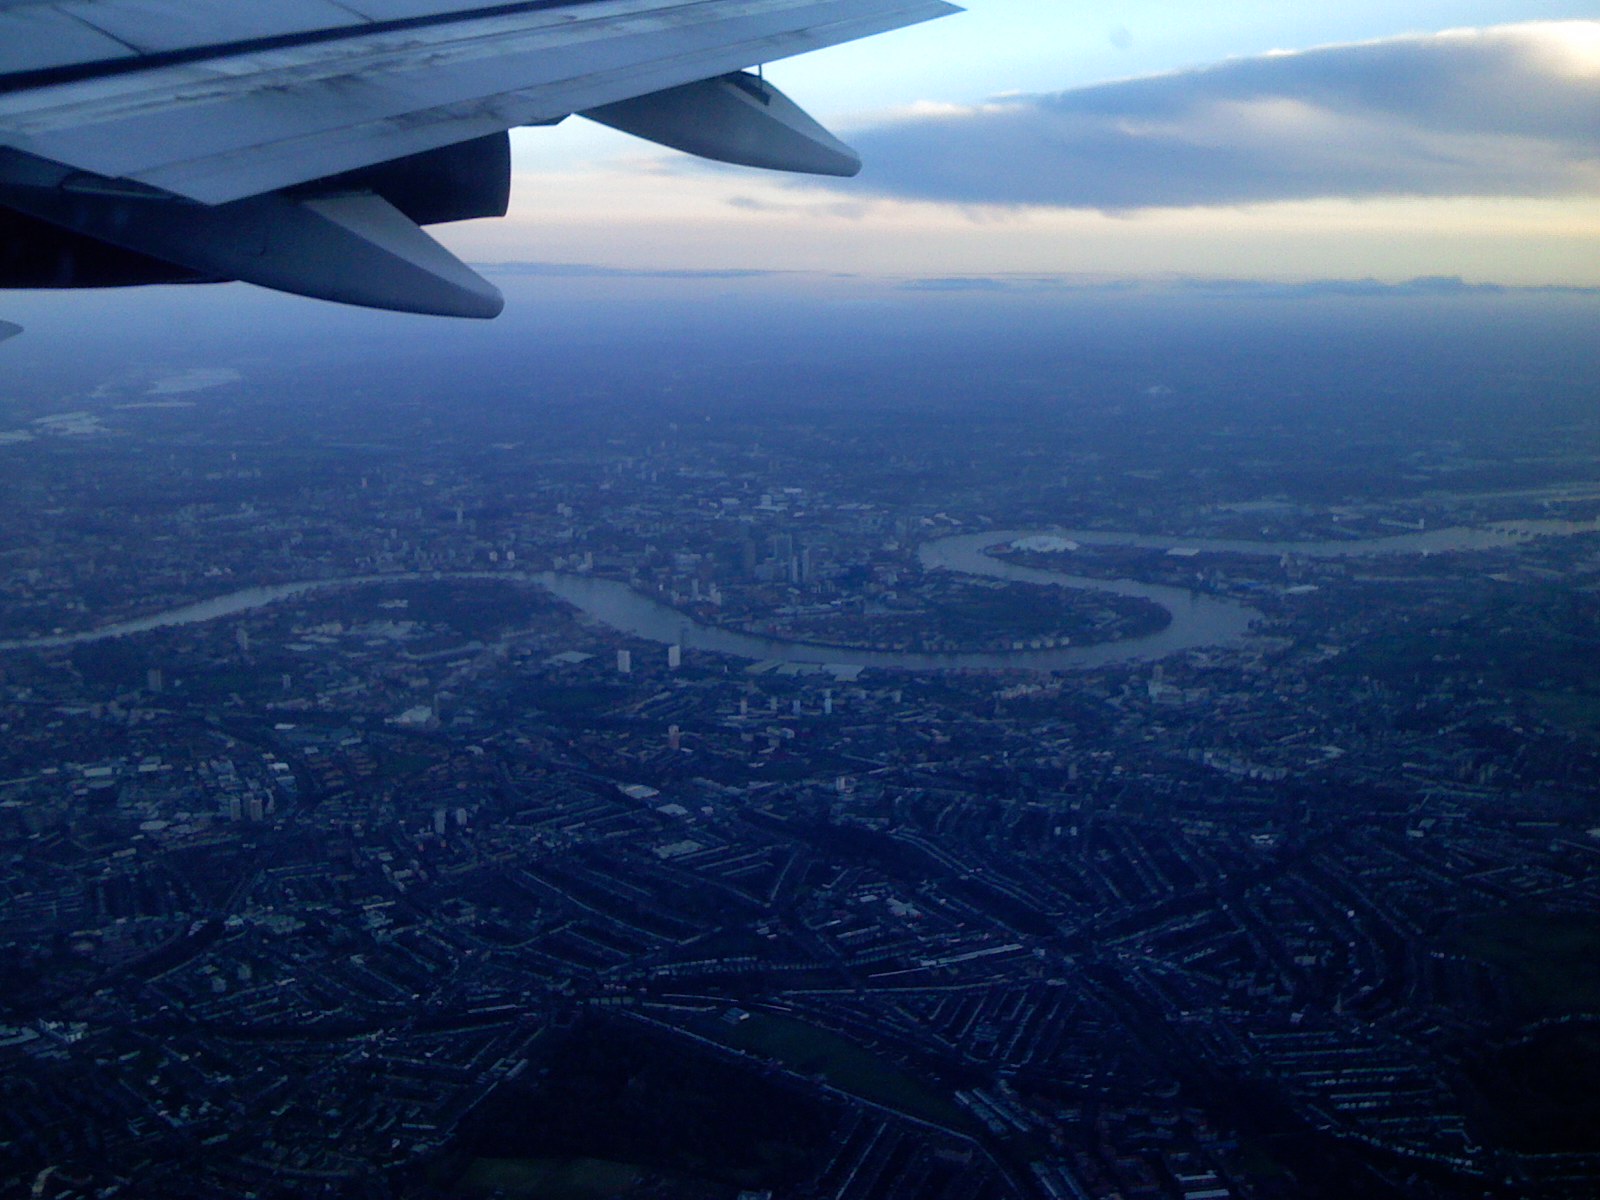 looking out an airplane window at the city and river